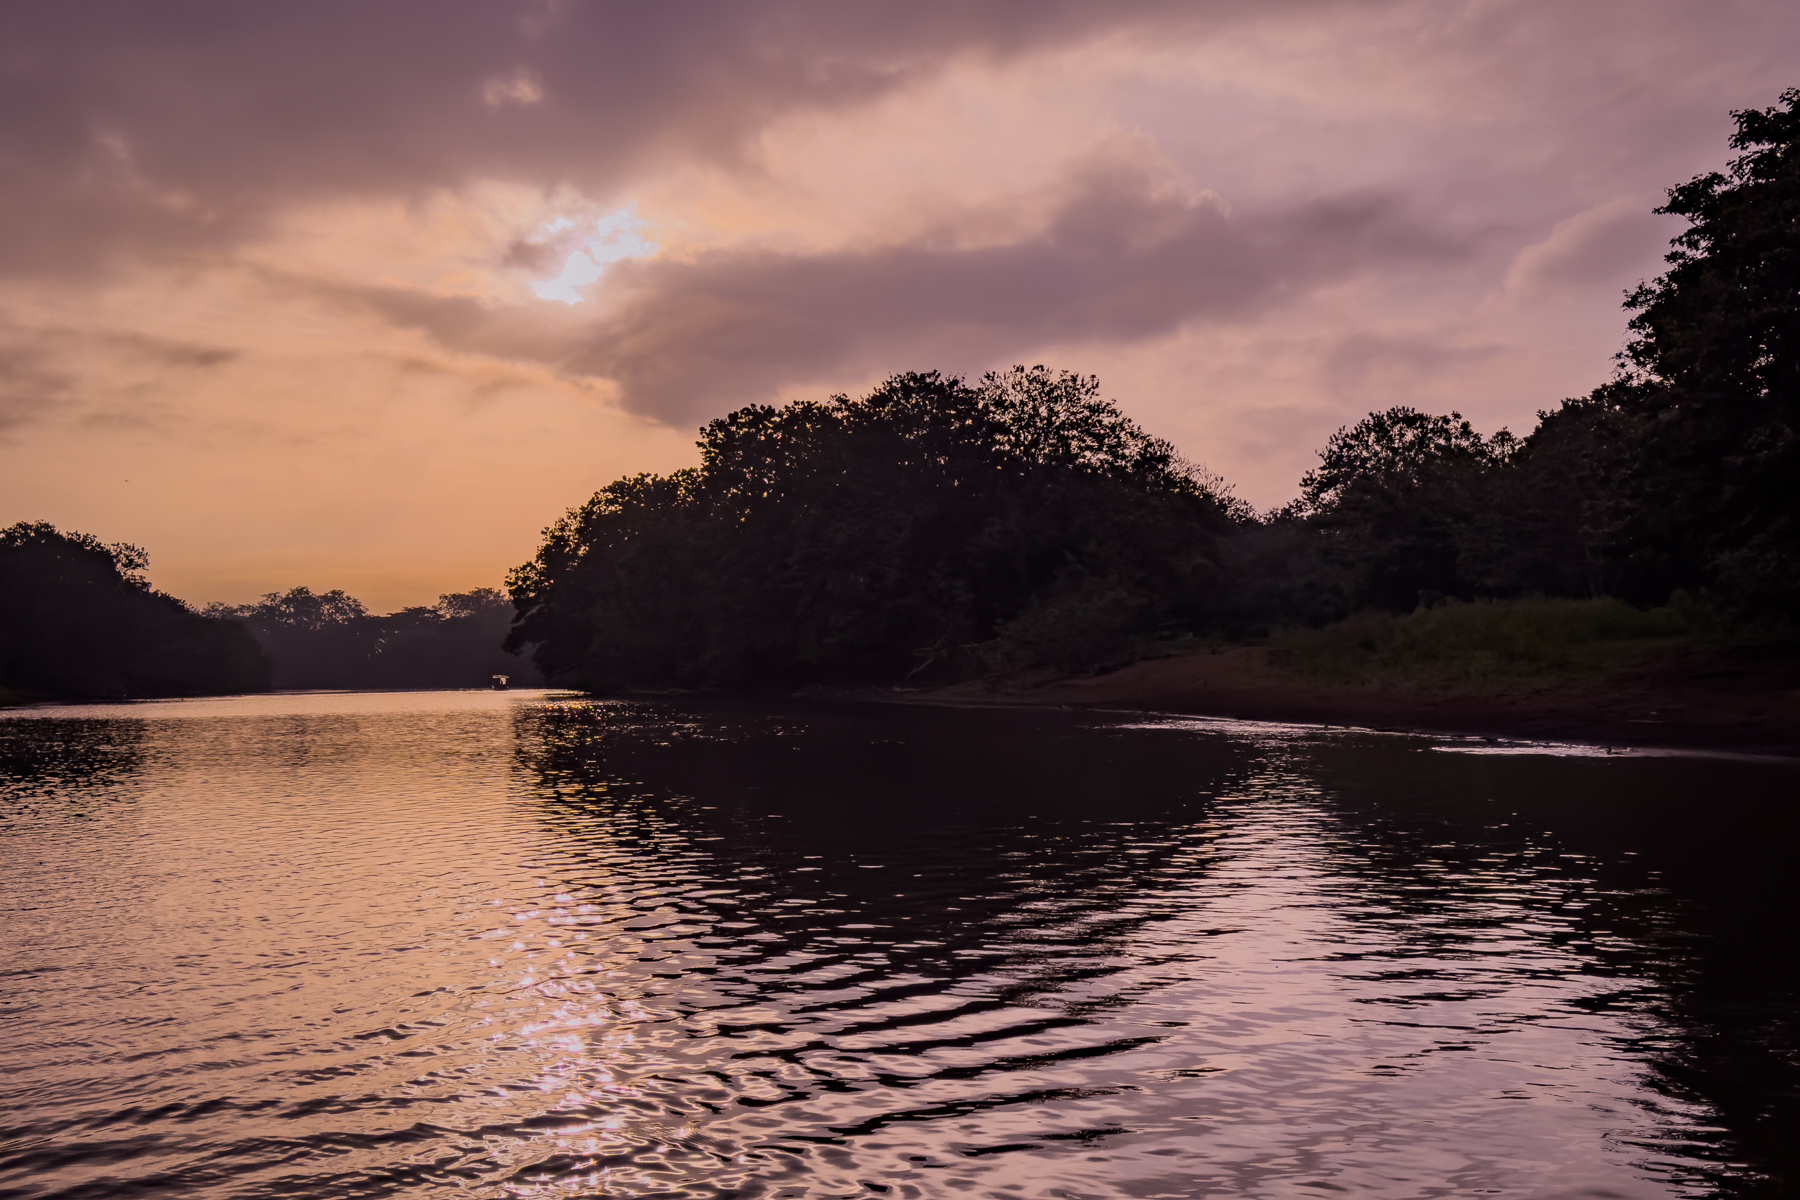 Sunrise on the Rio Frio in remote Costa Rica, close to the border of Nicaragua (image by Inger Vandyke)